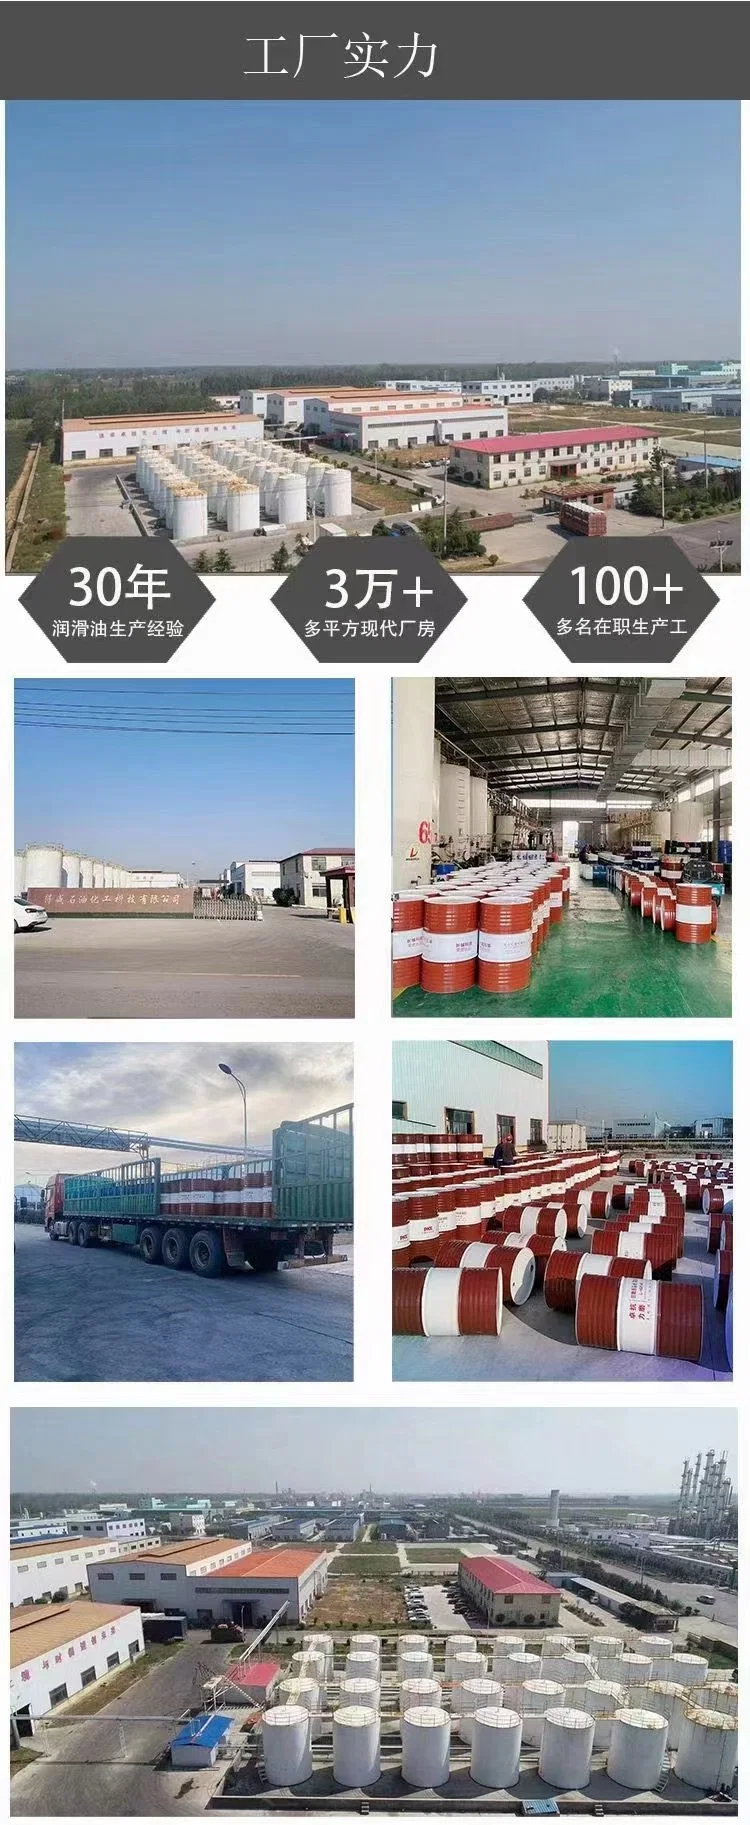 Synthetic Heat Conduction Oil Industrial Grade Oil Resistant to High Temperature